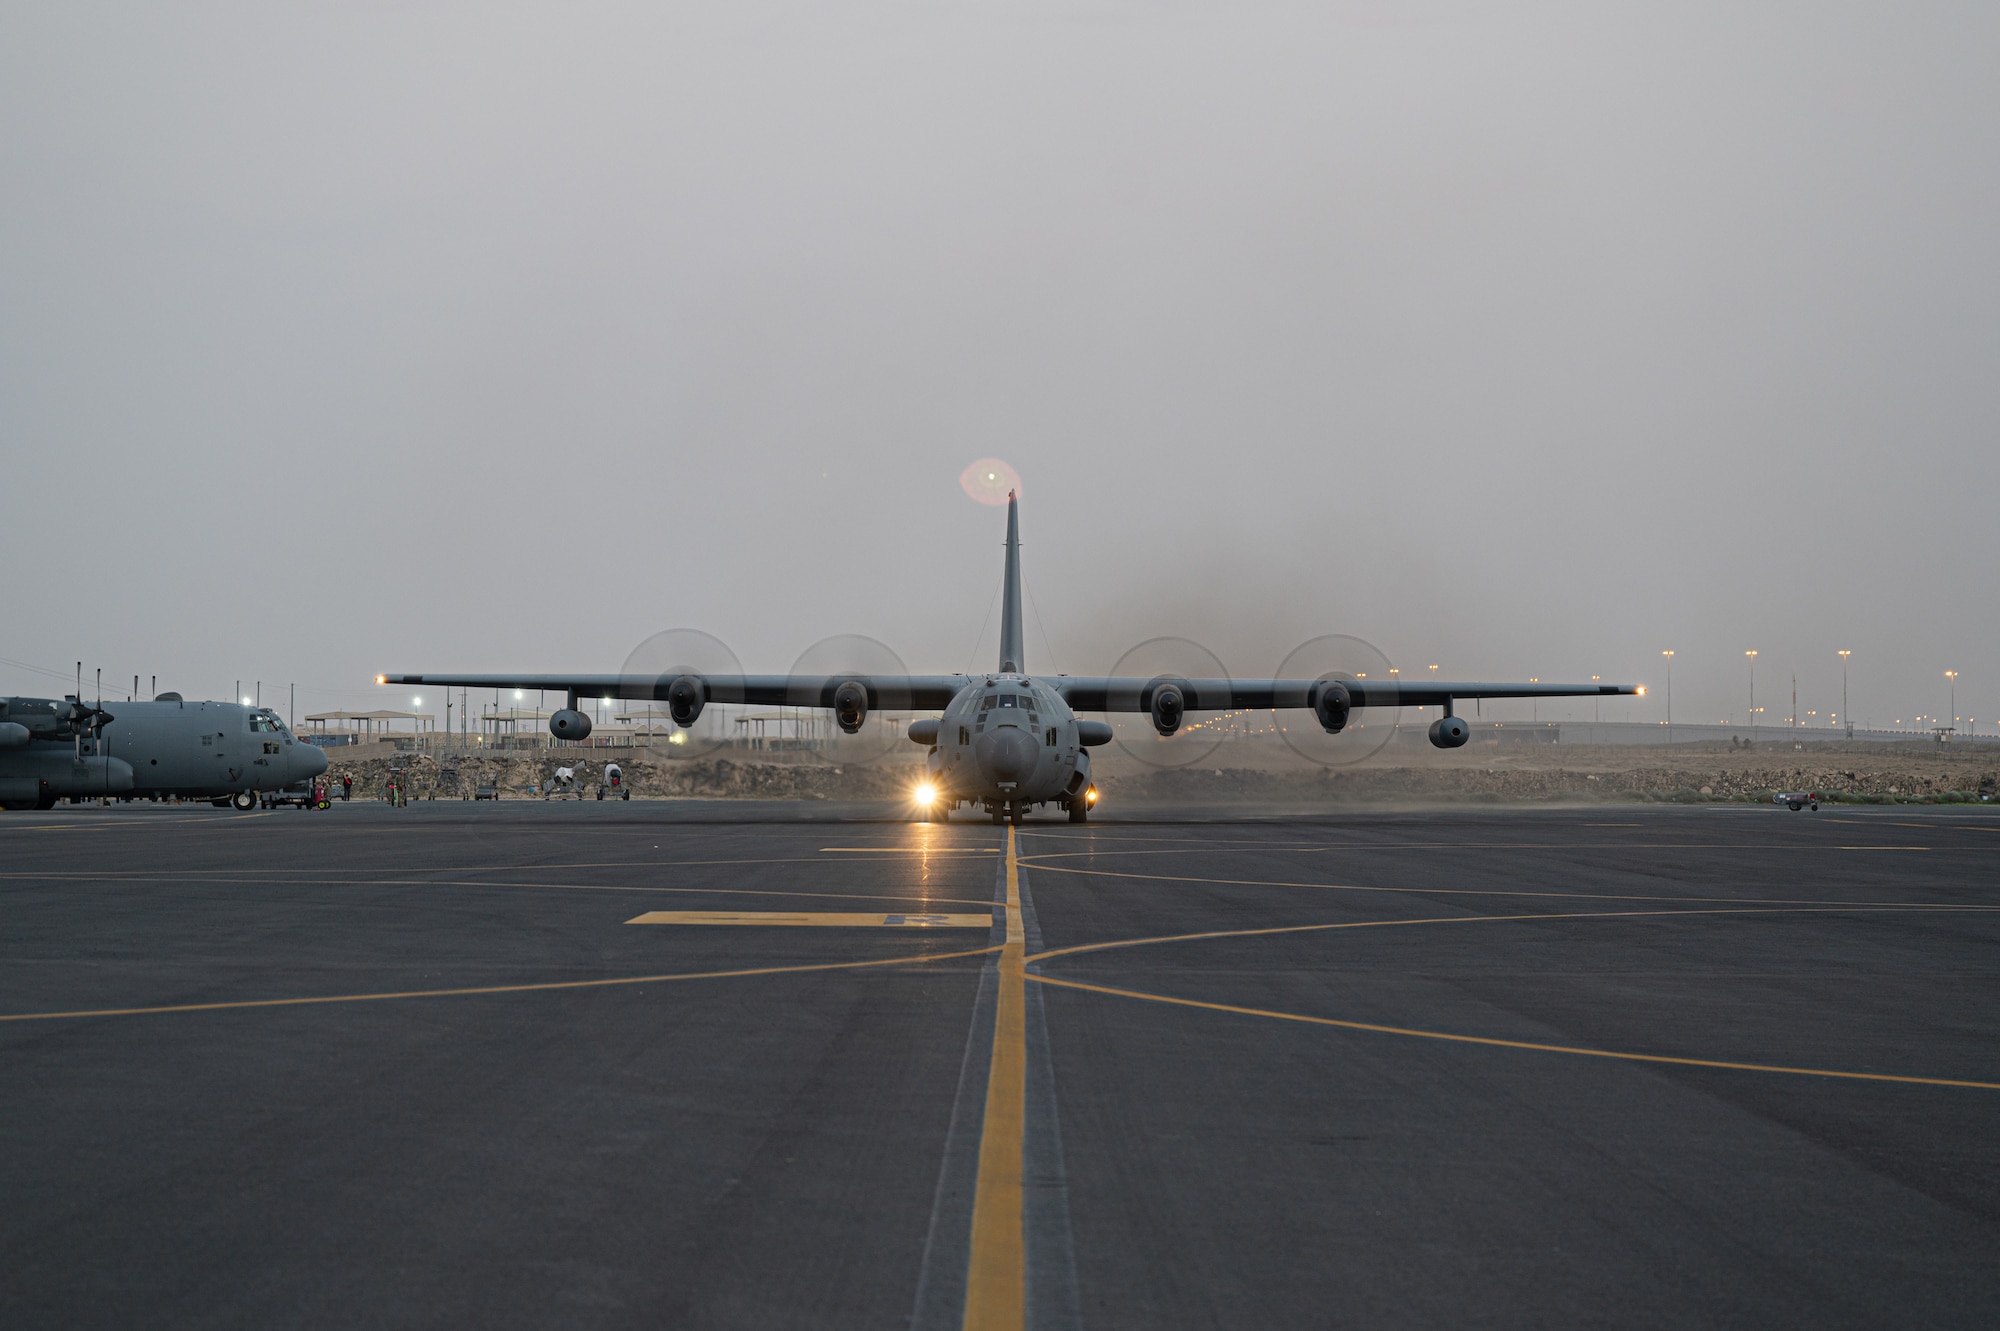 The rapid deployment of the EC-130s into the USCENTCOM area of responsibility exhibits the U.S.’s ability to incorporate additional combat capability at any time, deterring regional aggressors through the electronic warfare prowess.